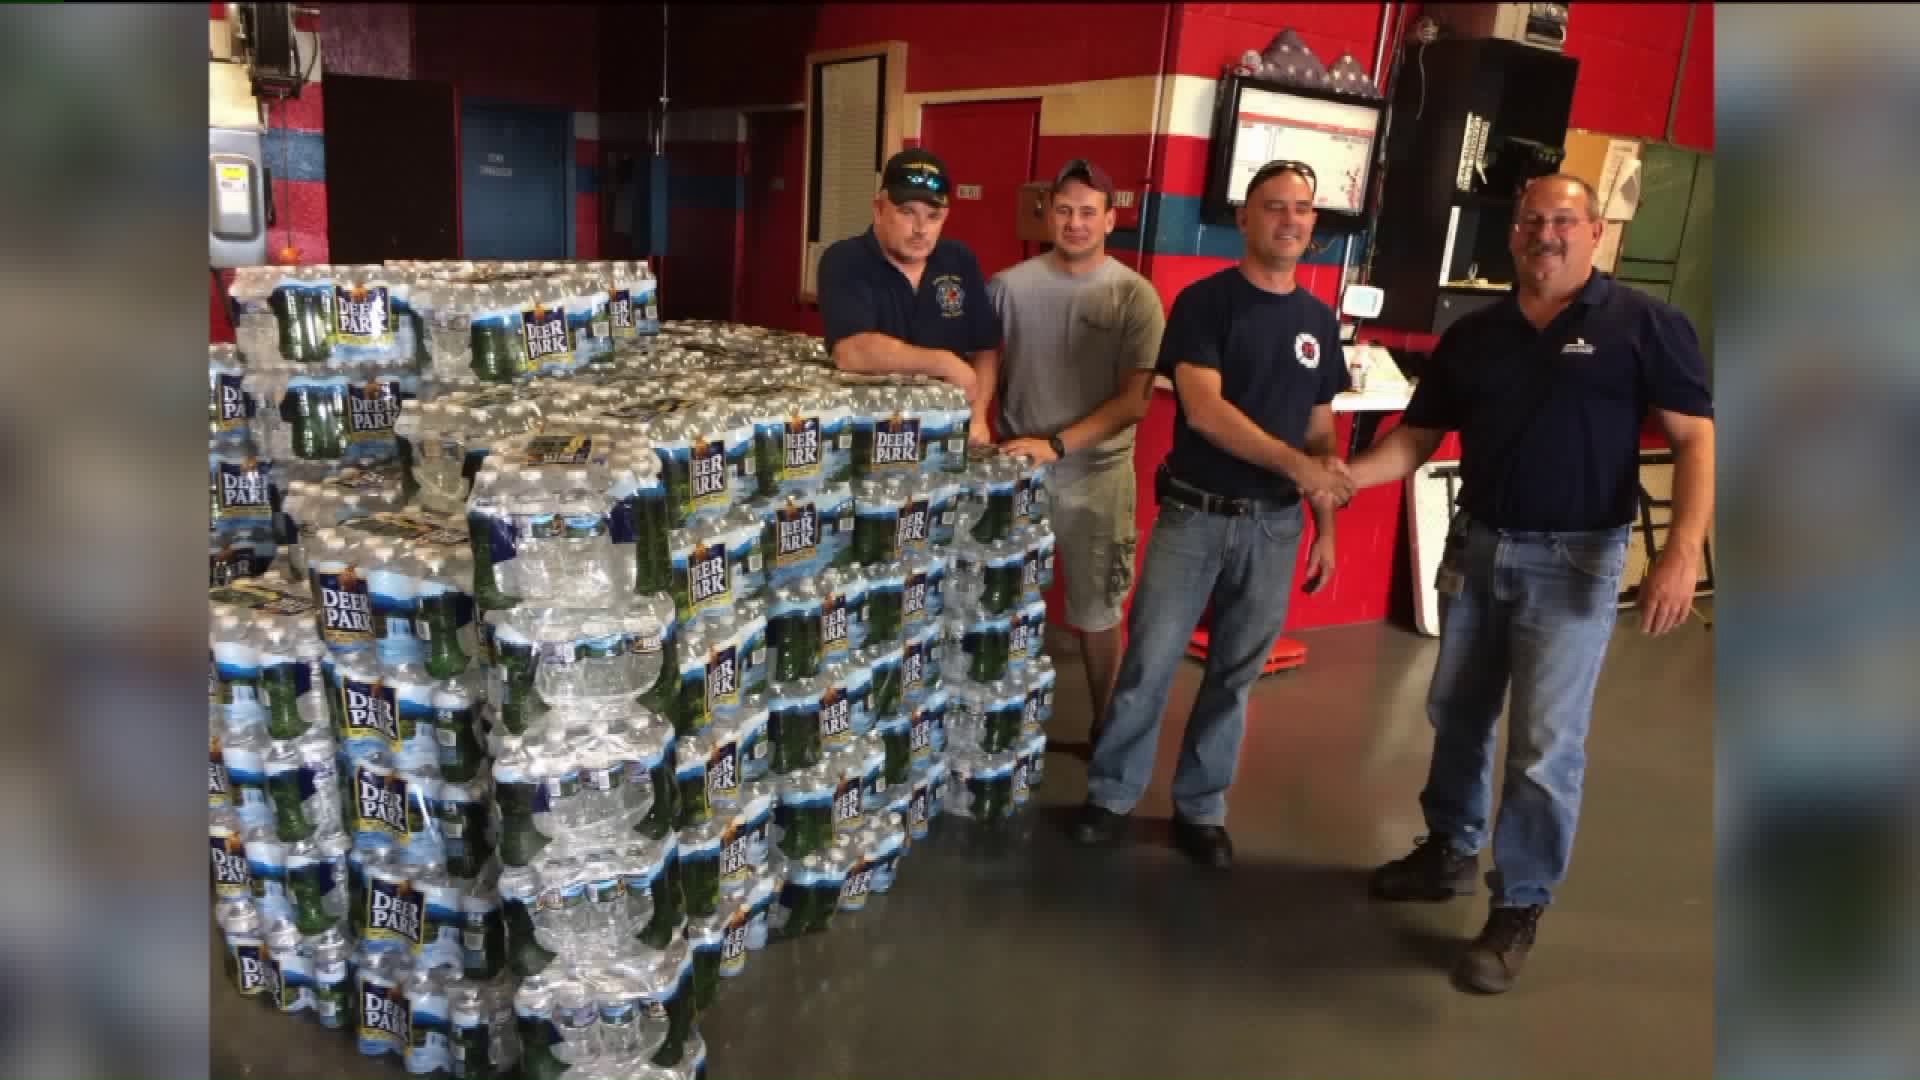 Business Provides Water for Thirsty Firefighters